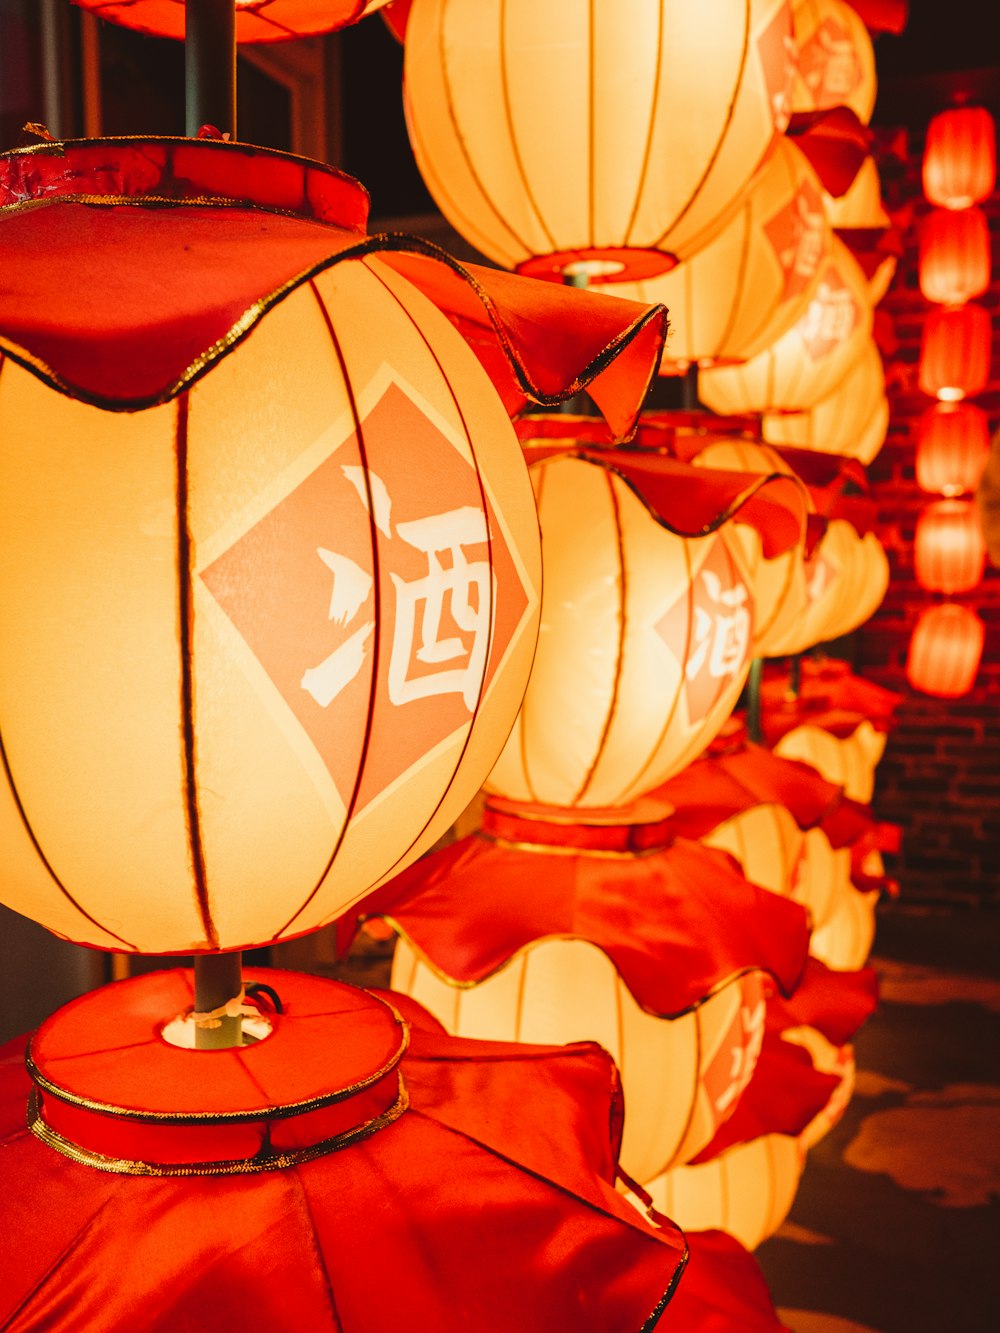 a row of lanterns with chinese writing on them